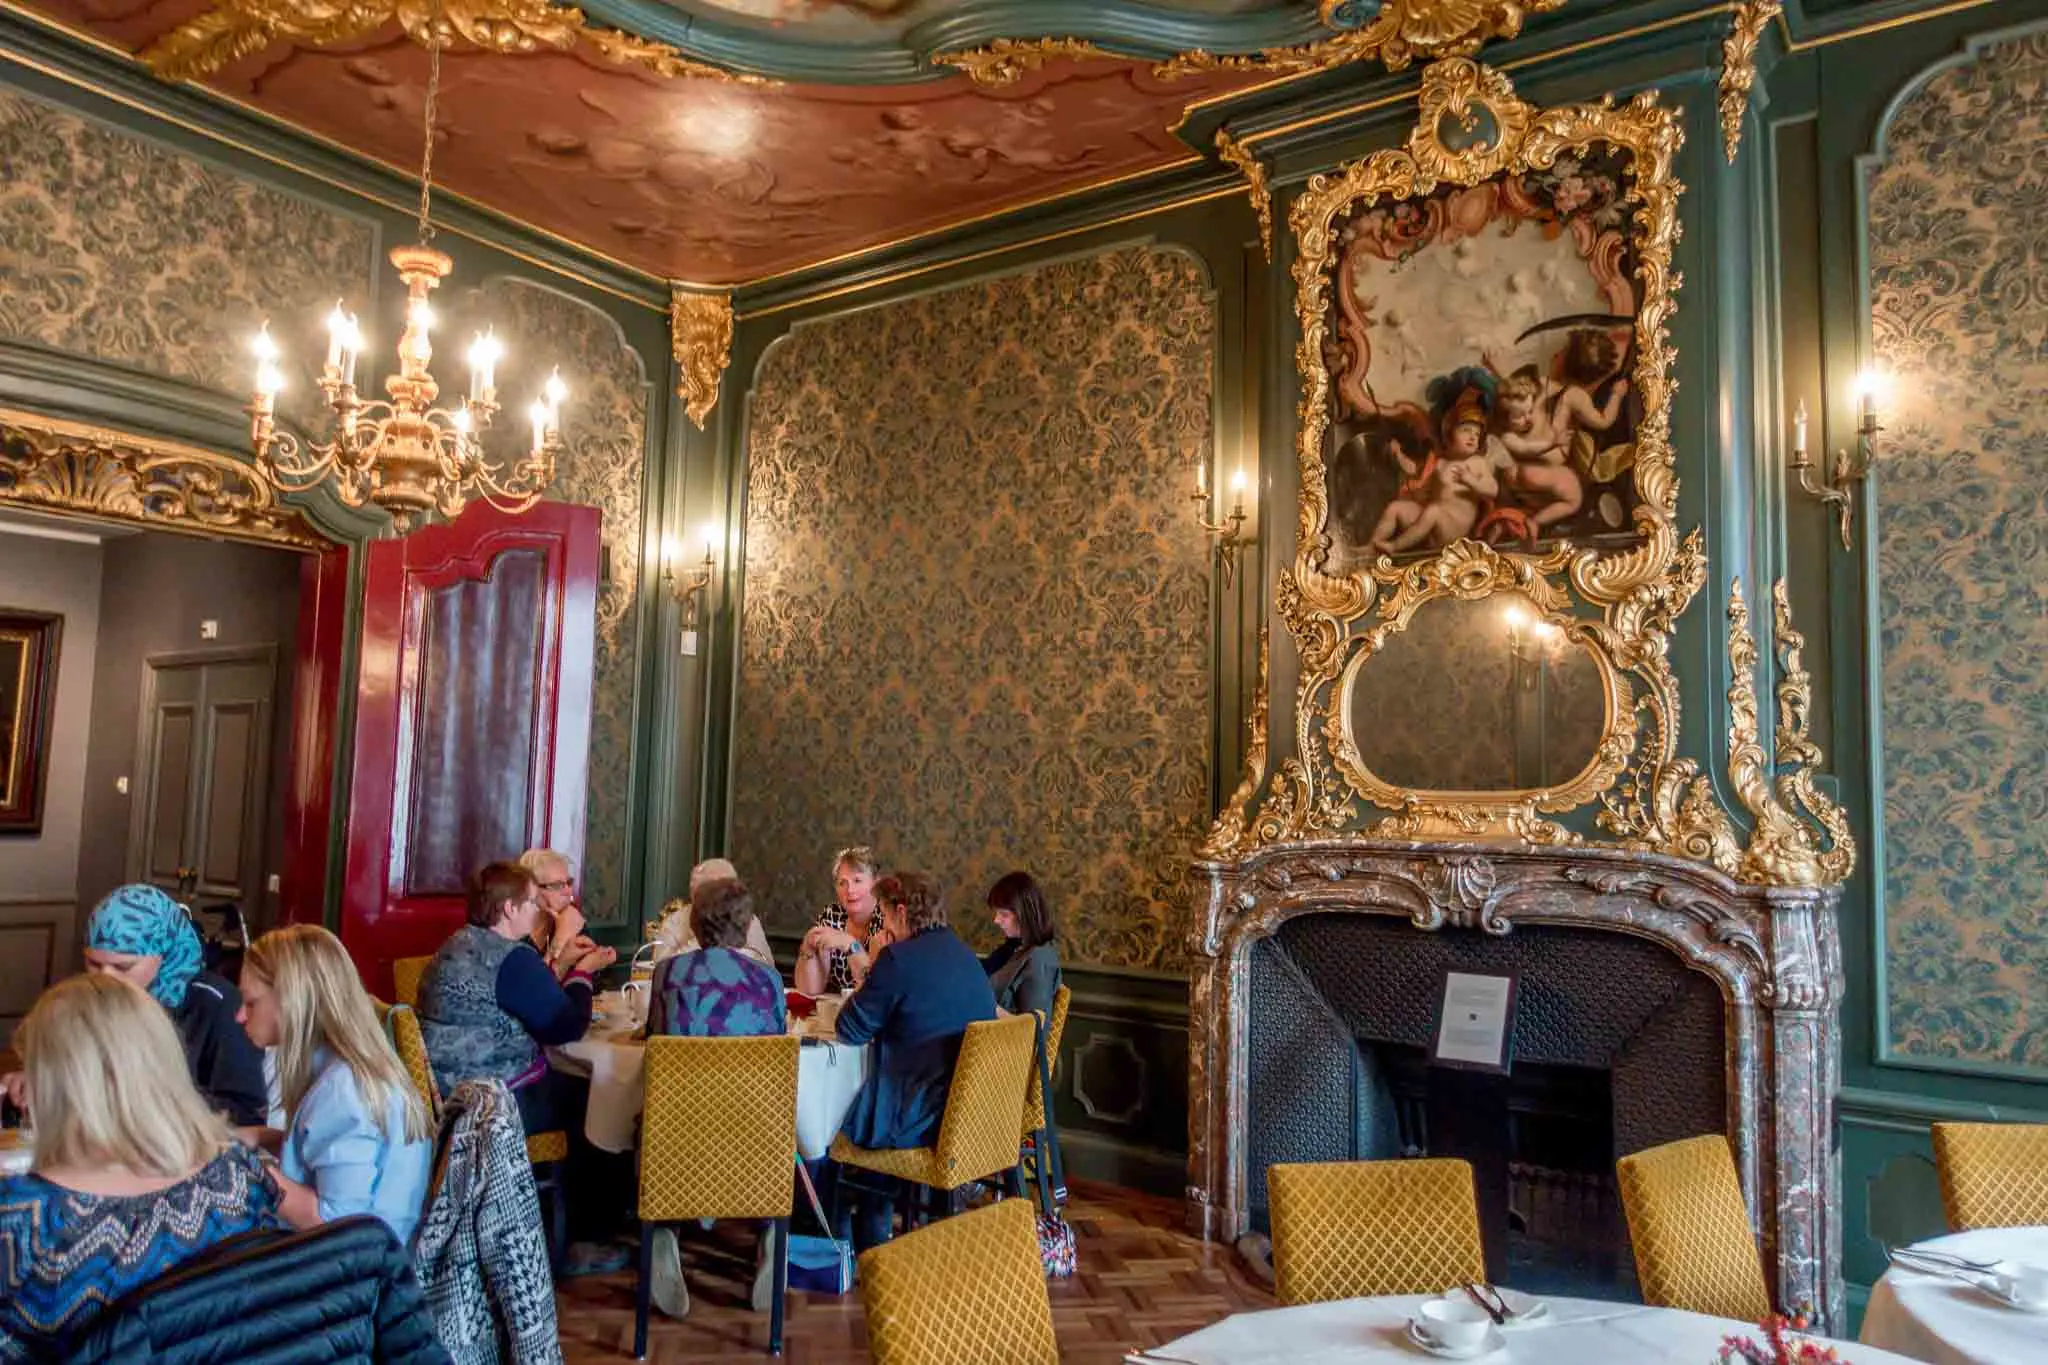 People in tea room decorated with brocade wallpaper and ornate fireplace